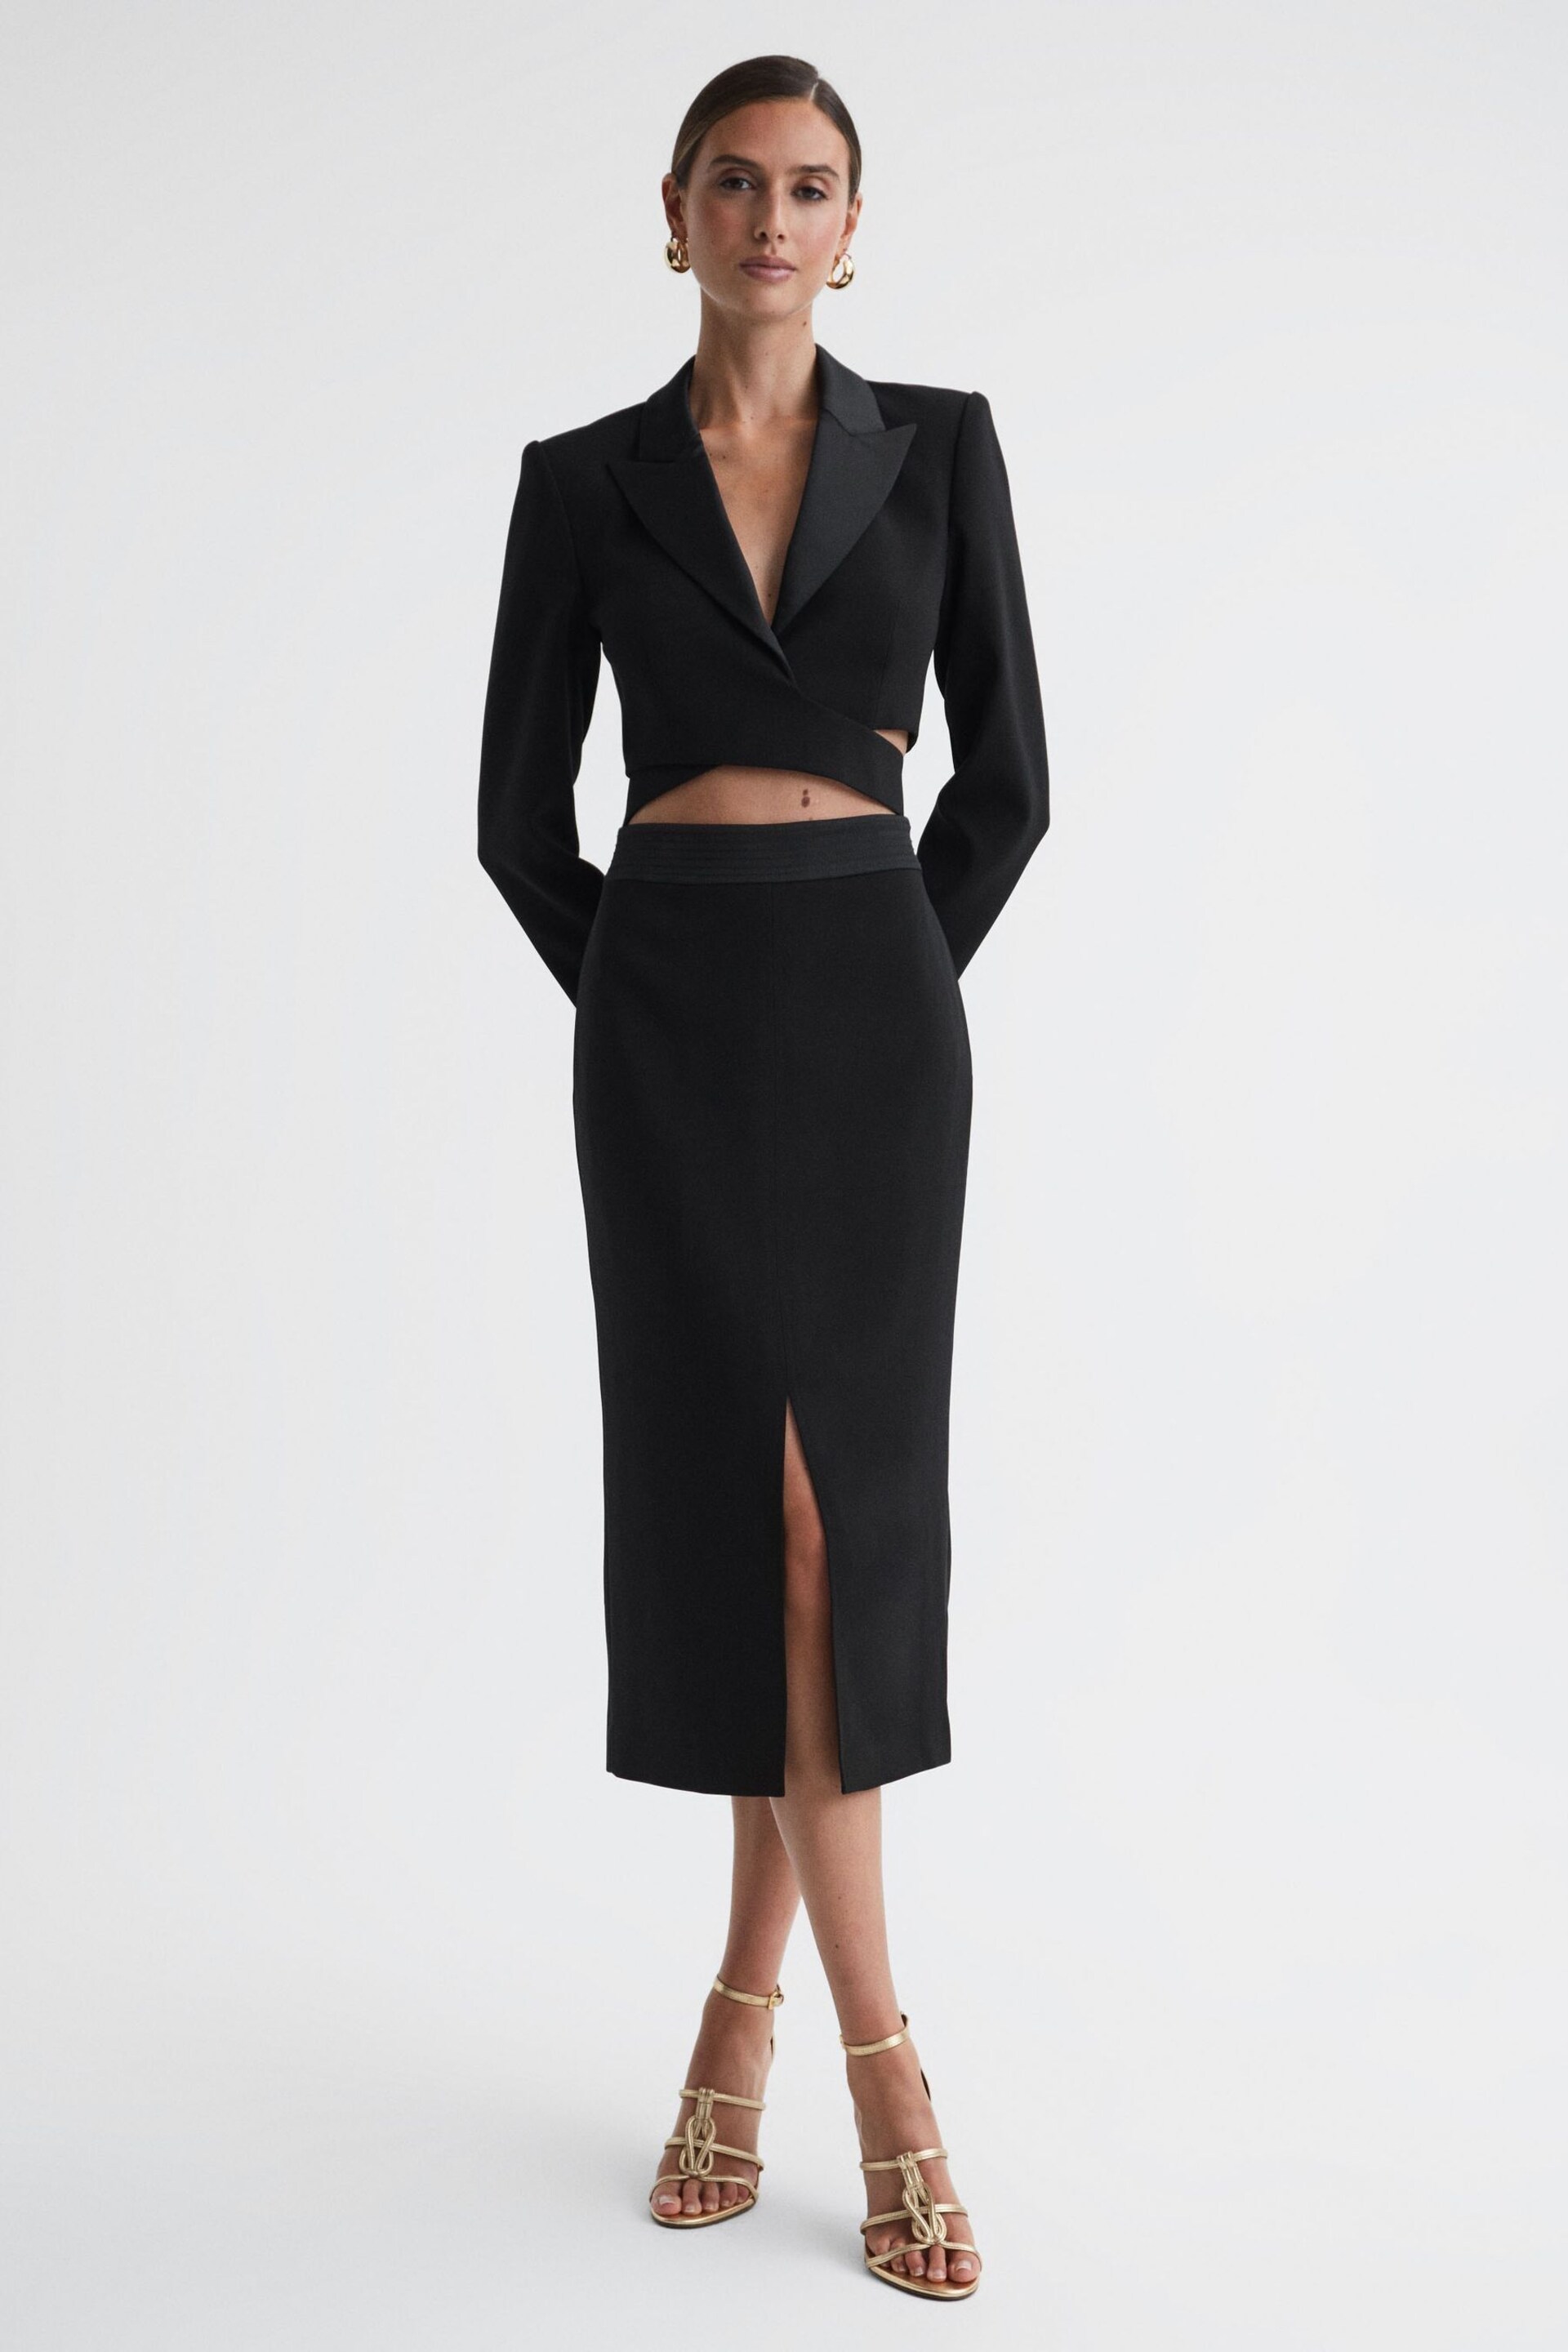 Reiss Black Quinn Satin Cropped Tux Top - Image 1 of 4